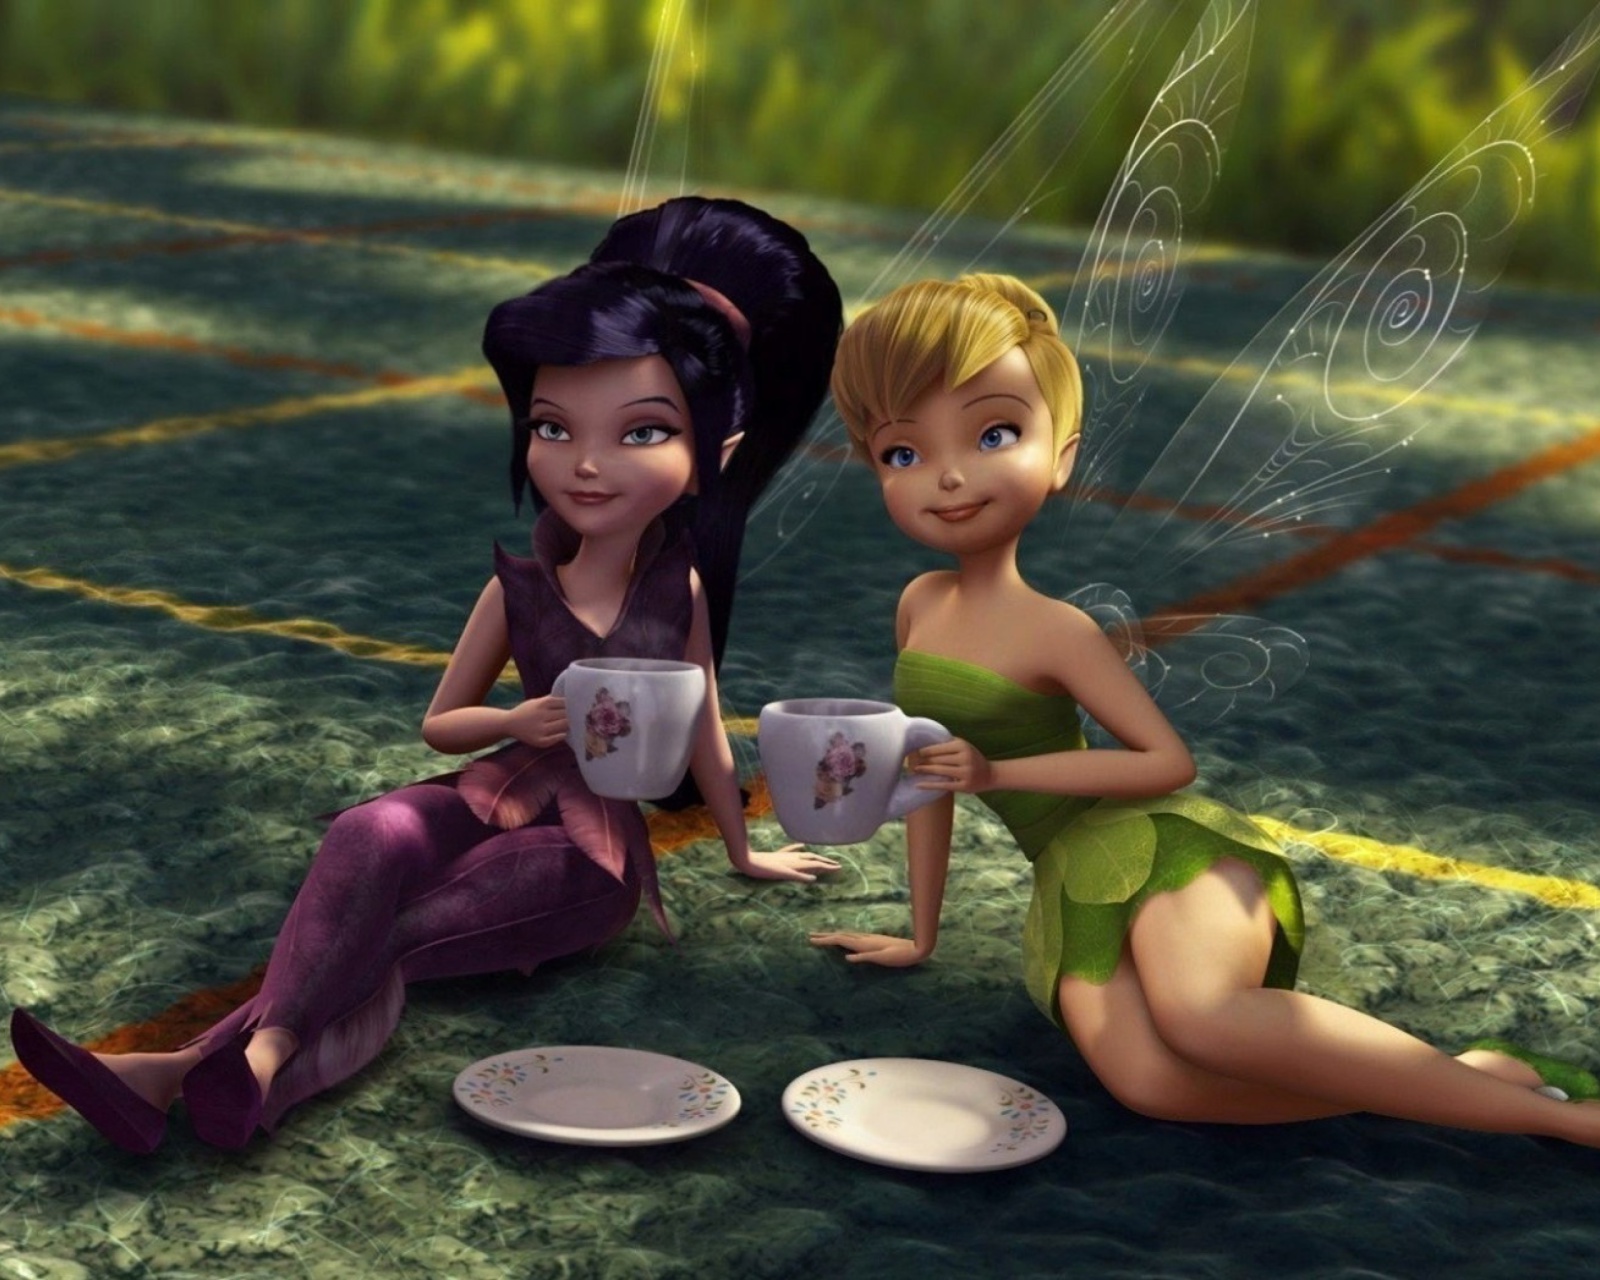 Fondo de pantalla Tinker Bell And The Great Fairy Rescue 1600x1280